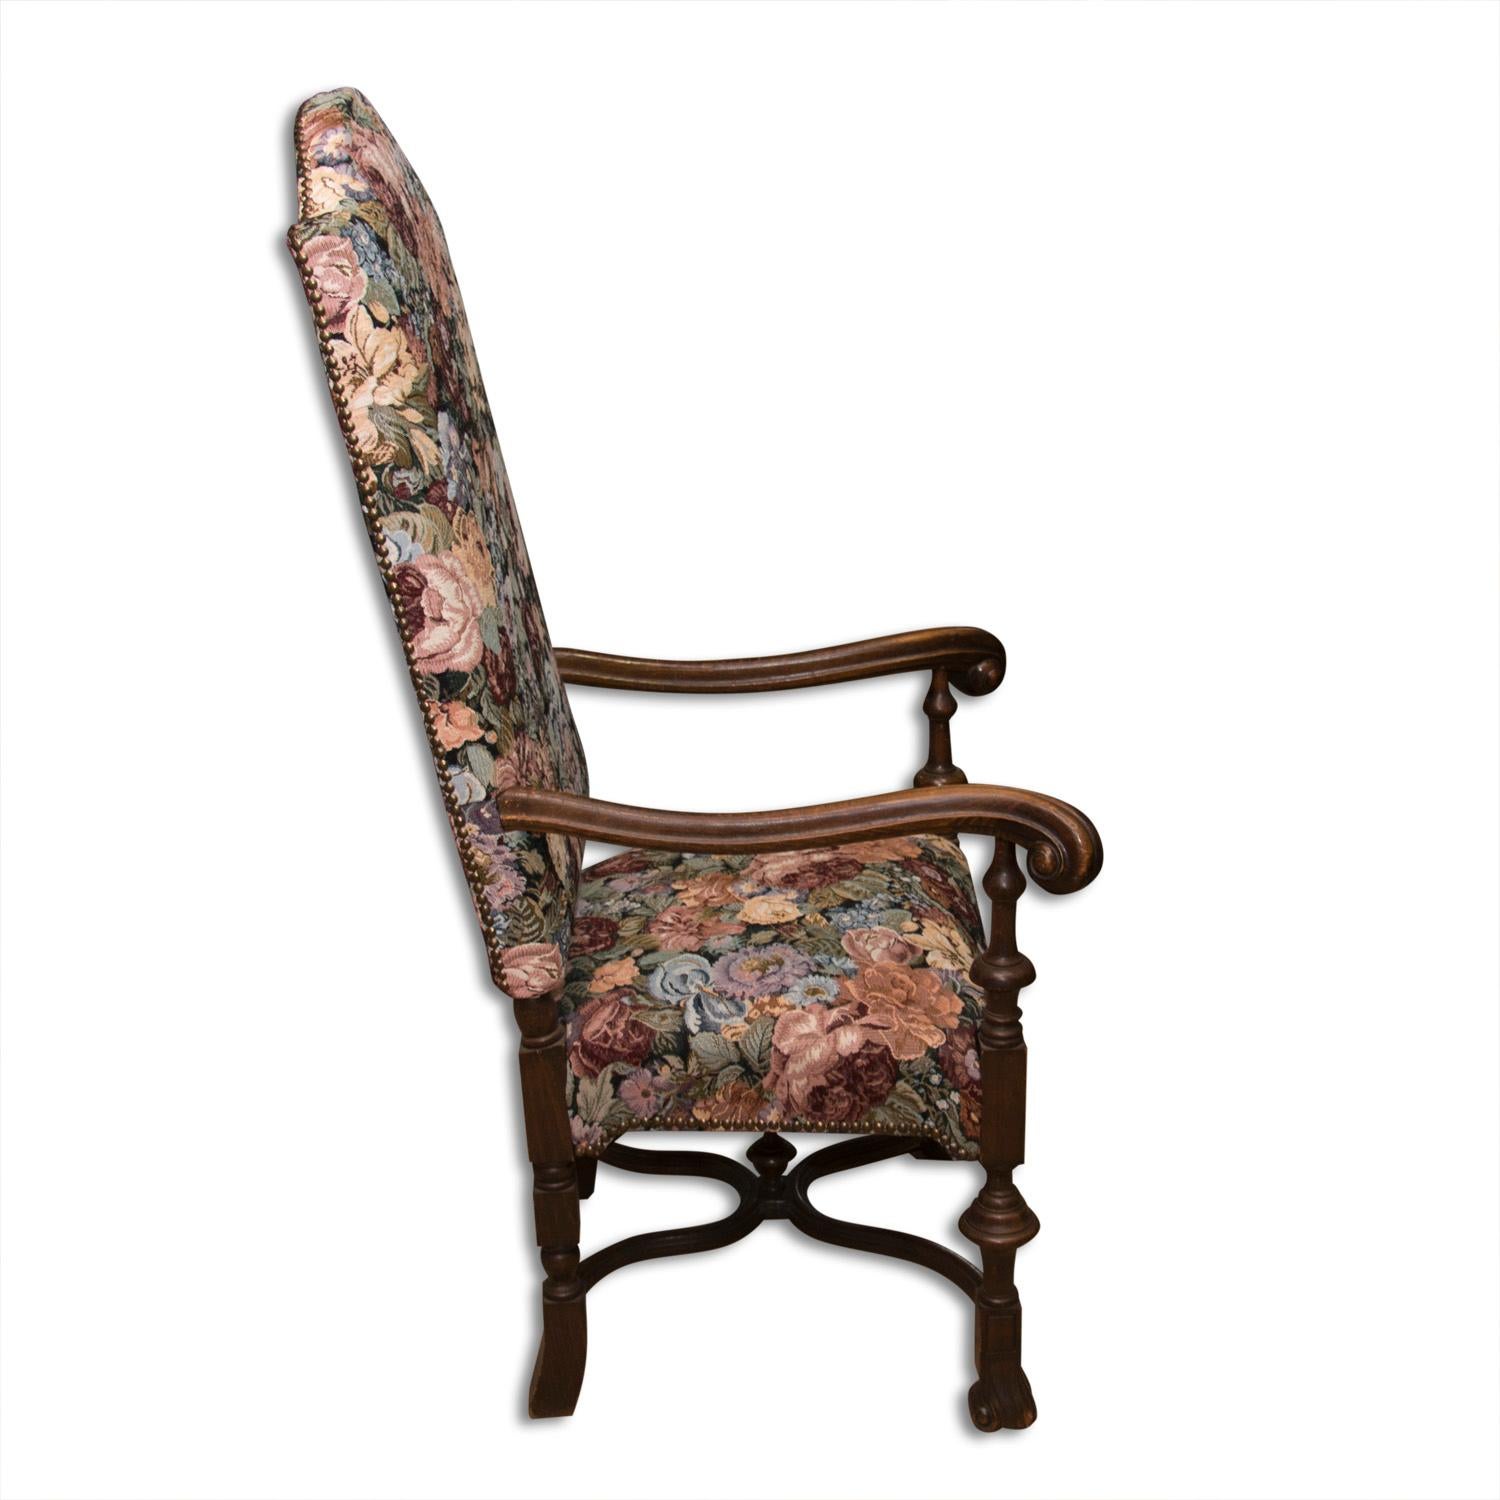 Fabric Antique Throne Armchair in Renaissance Style, 19th Century For Sale